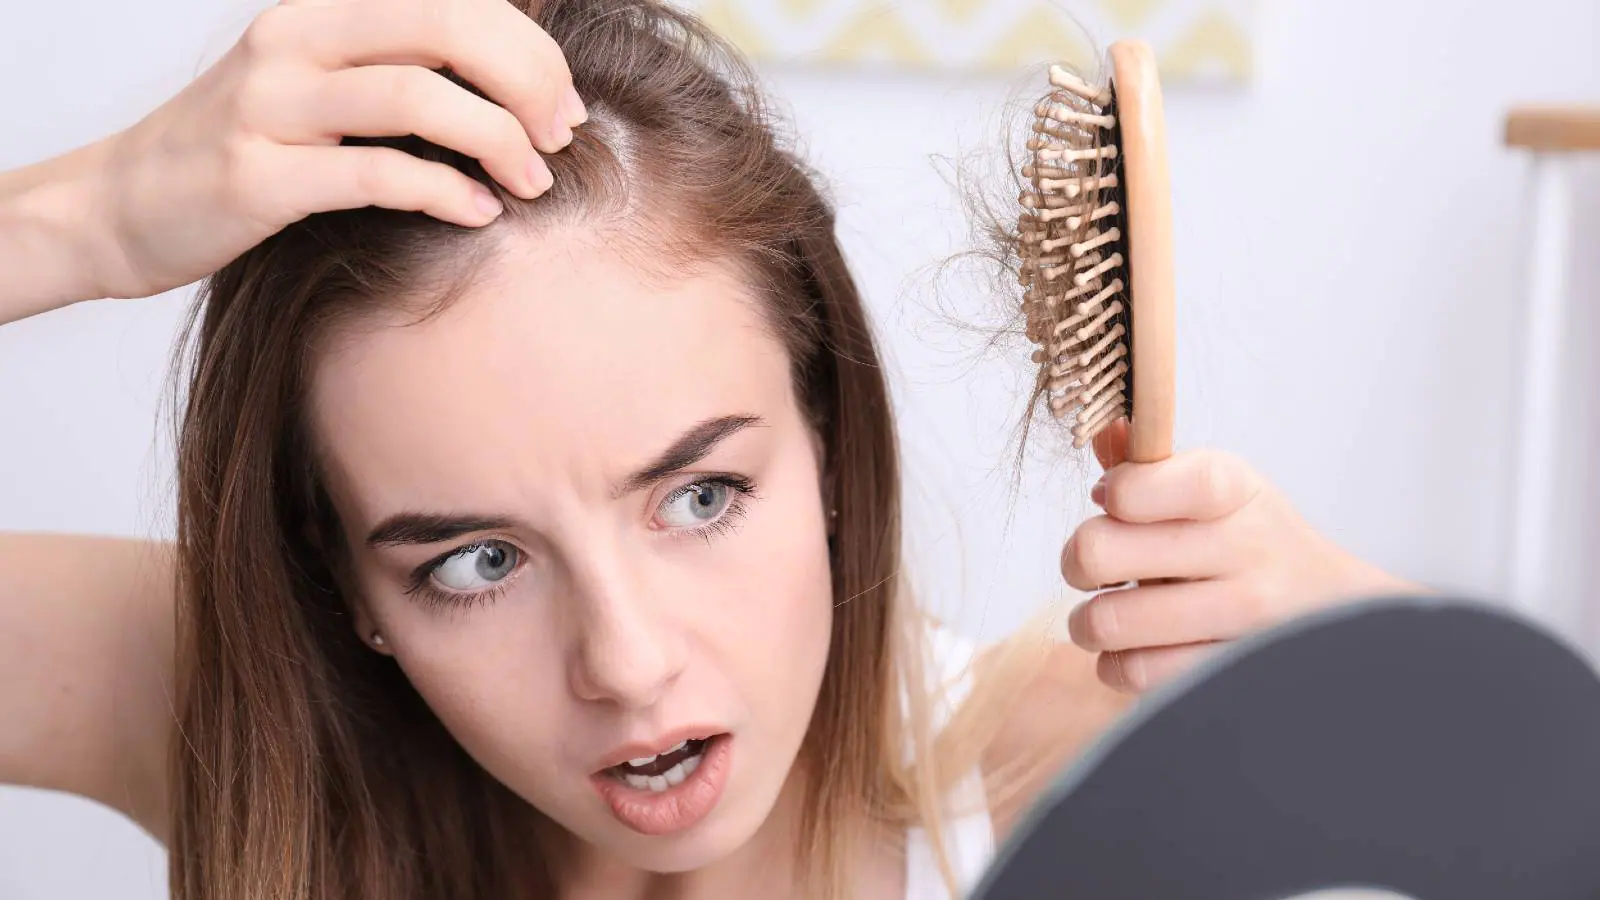 Don't lose your mind over thinning hair! Fix it with these 5 home remedies